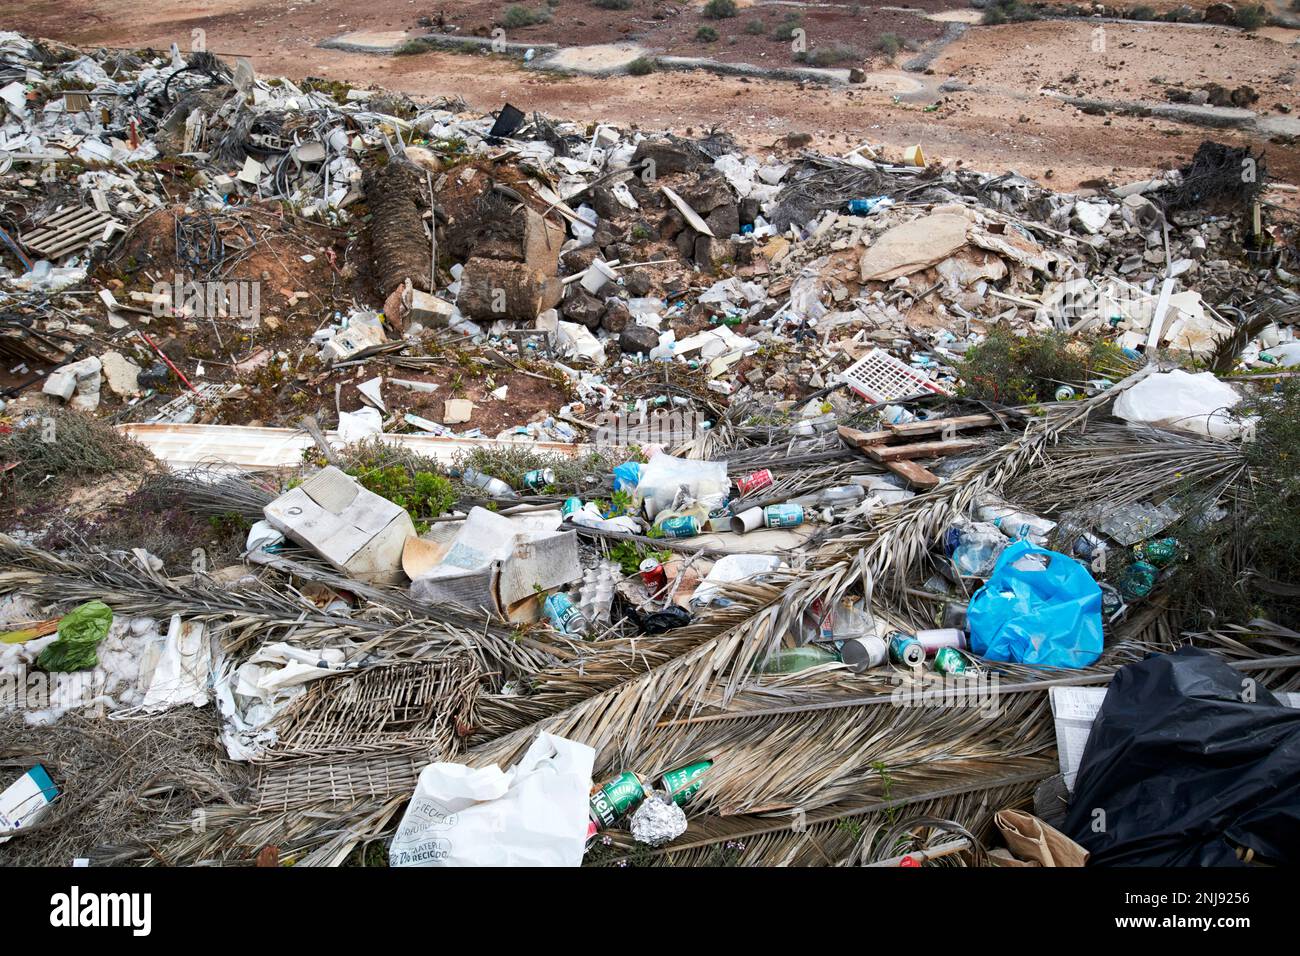 flytipping rubbish thrown into construction site next to a development in Lanzarote, Canary Islands, Spain Stock Photo